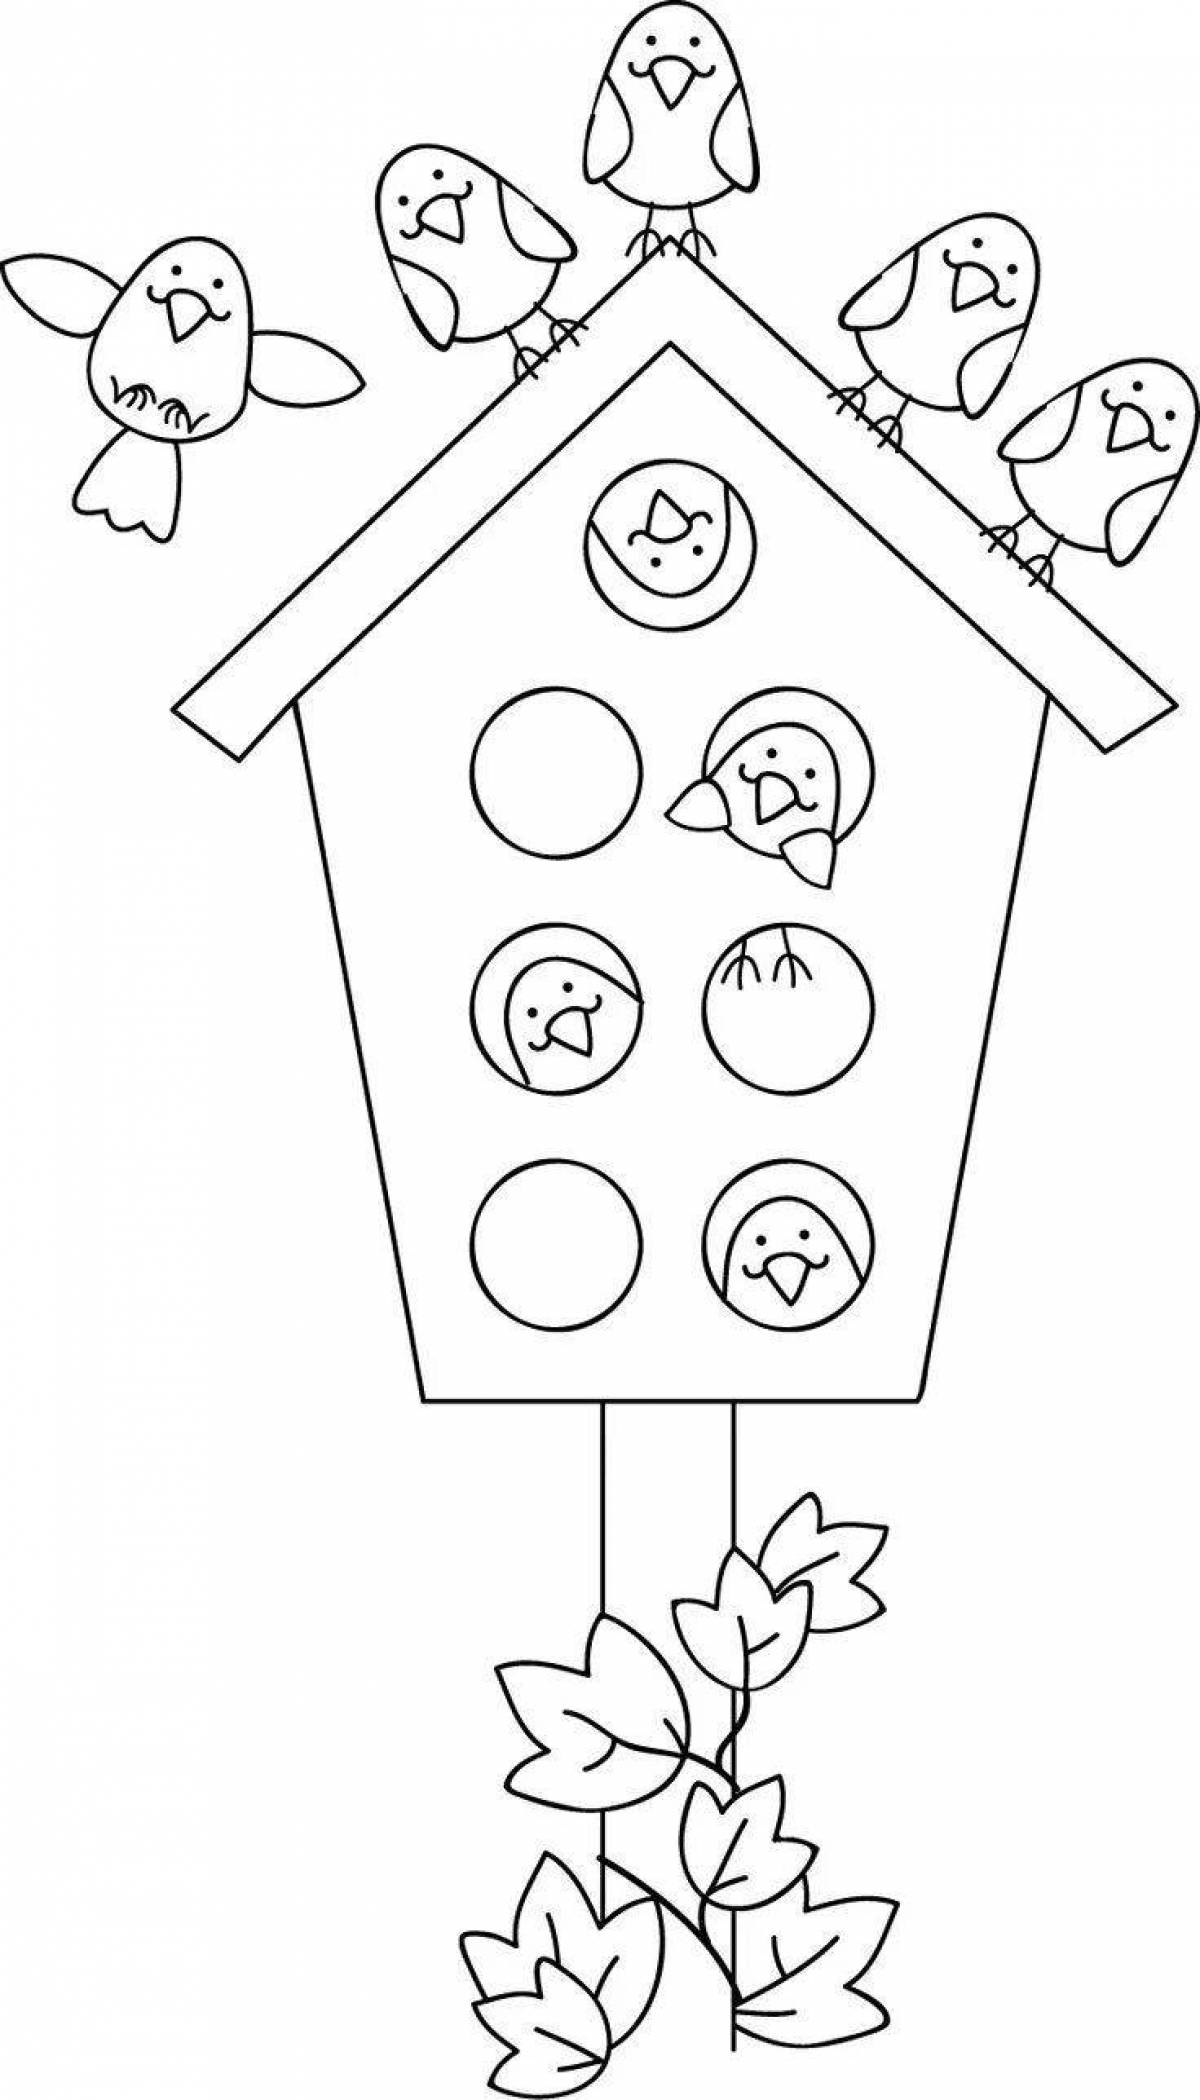 Great birdhouse coloring book for kids 3-4 years old